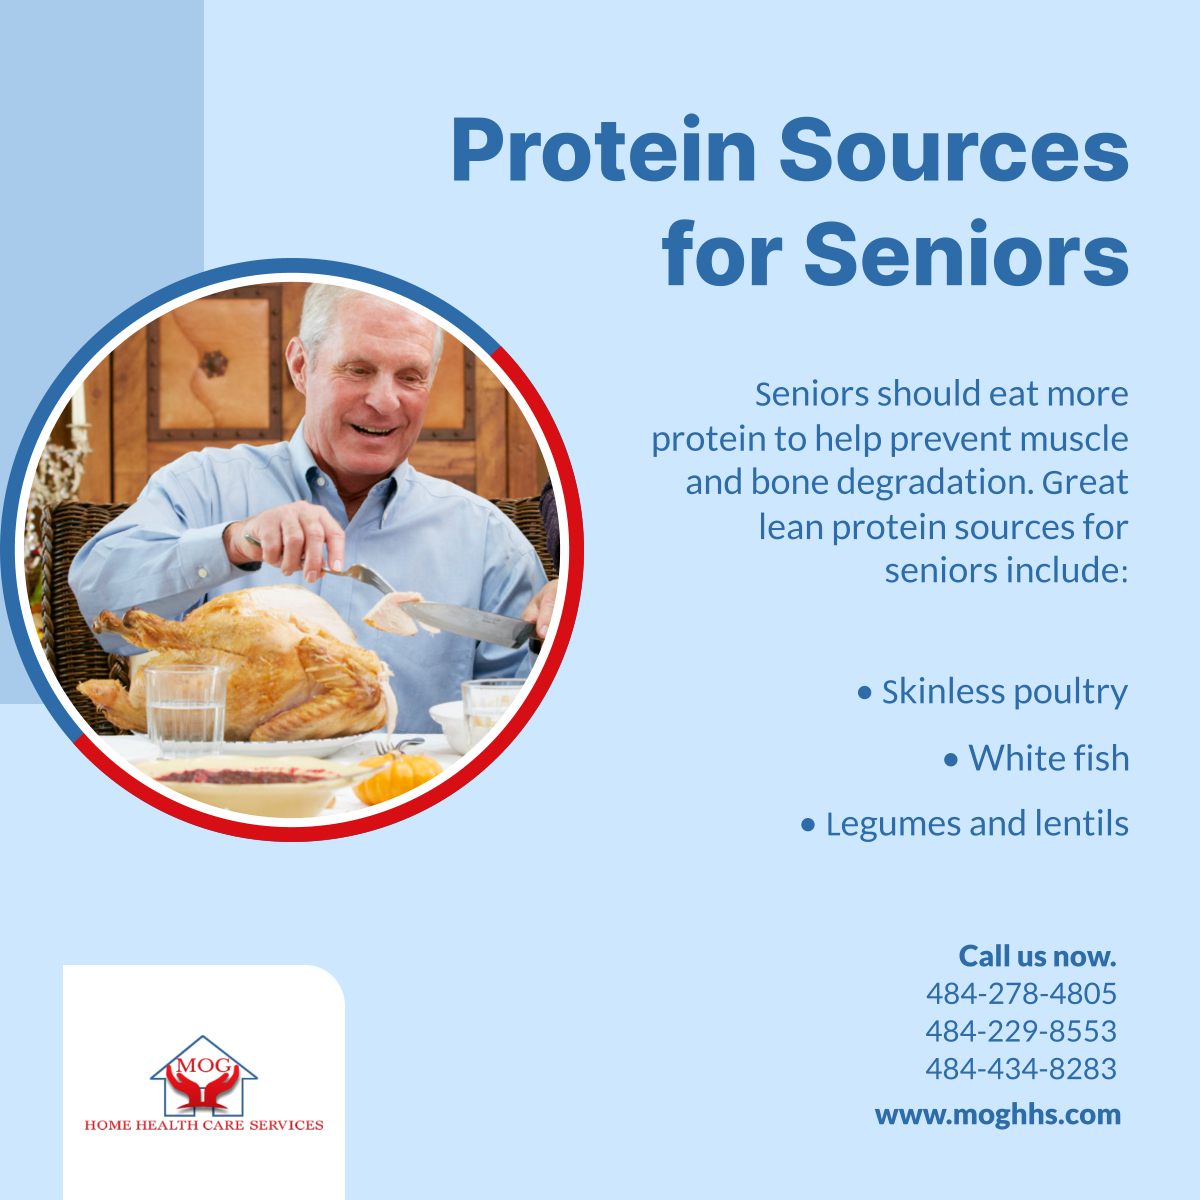 Following a healthy diet, including eating more protein, helps seniors remain independent for longer. For meal preparation assistance, feel free to call us at 484-278-4805.

#HomeHealthCare #Seniors #MealPreparation #WillowGrovePA